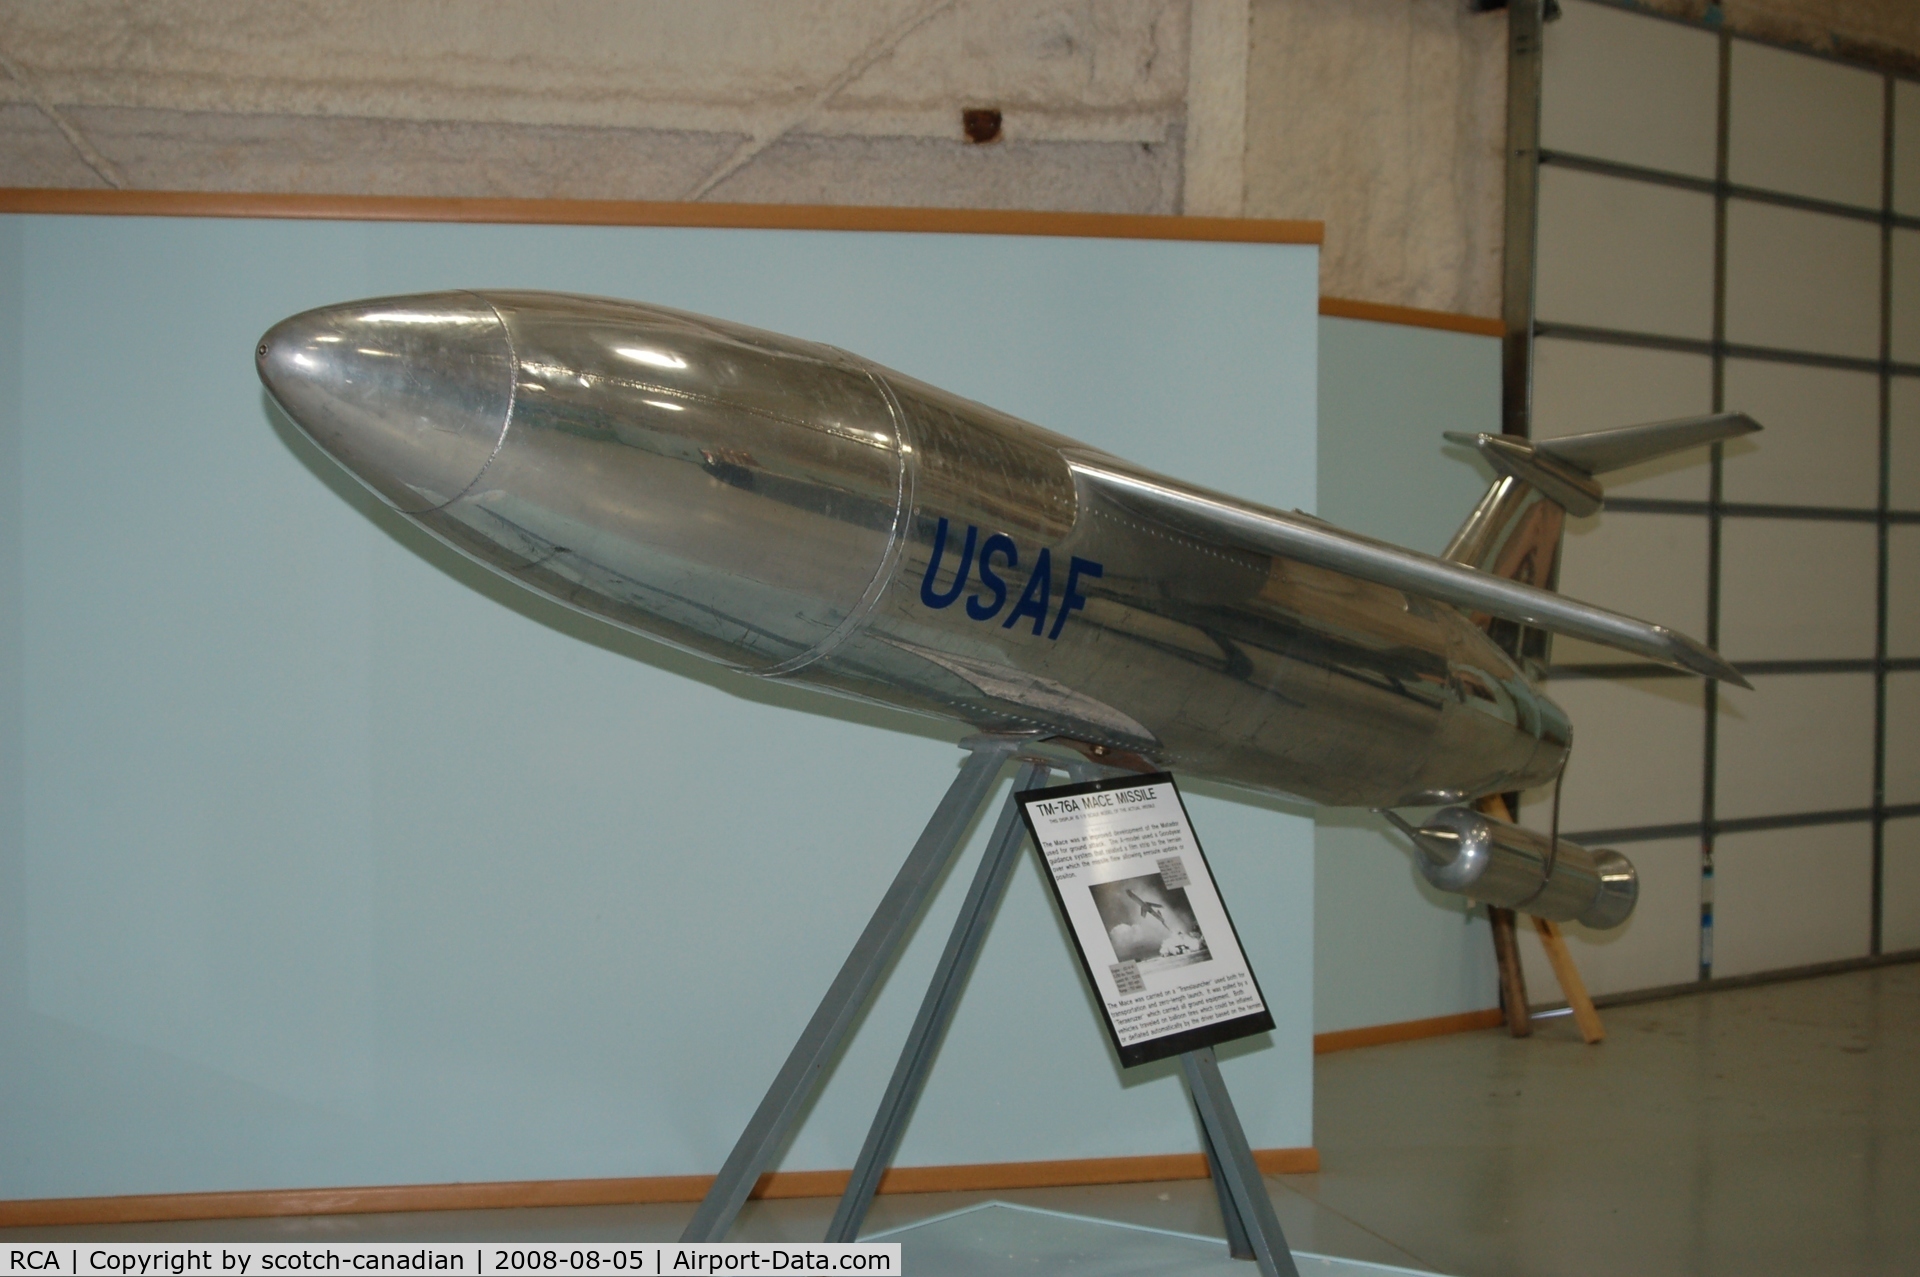 Ellsworth Afb Airport (RCA) - TM-76A Mace Missile at the South Dakota Air and Space Museum, Box Elder, SD